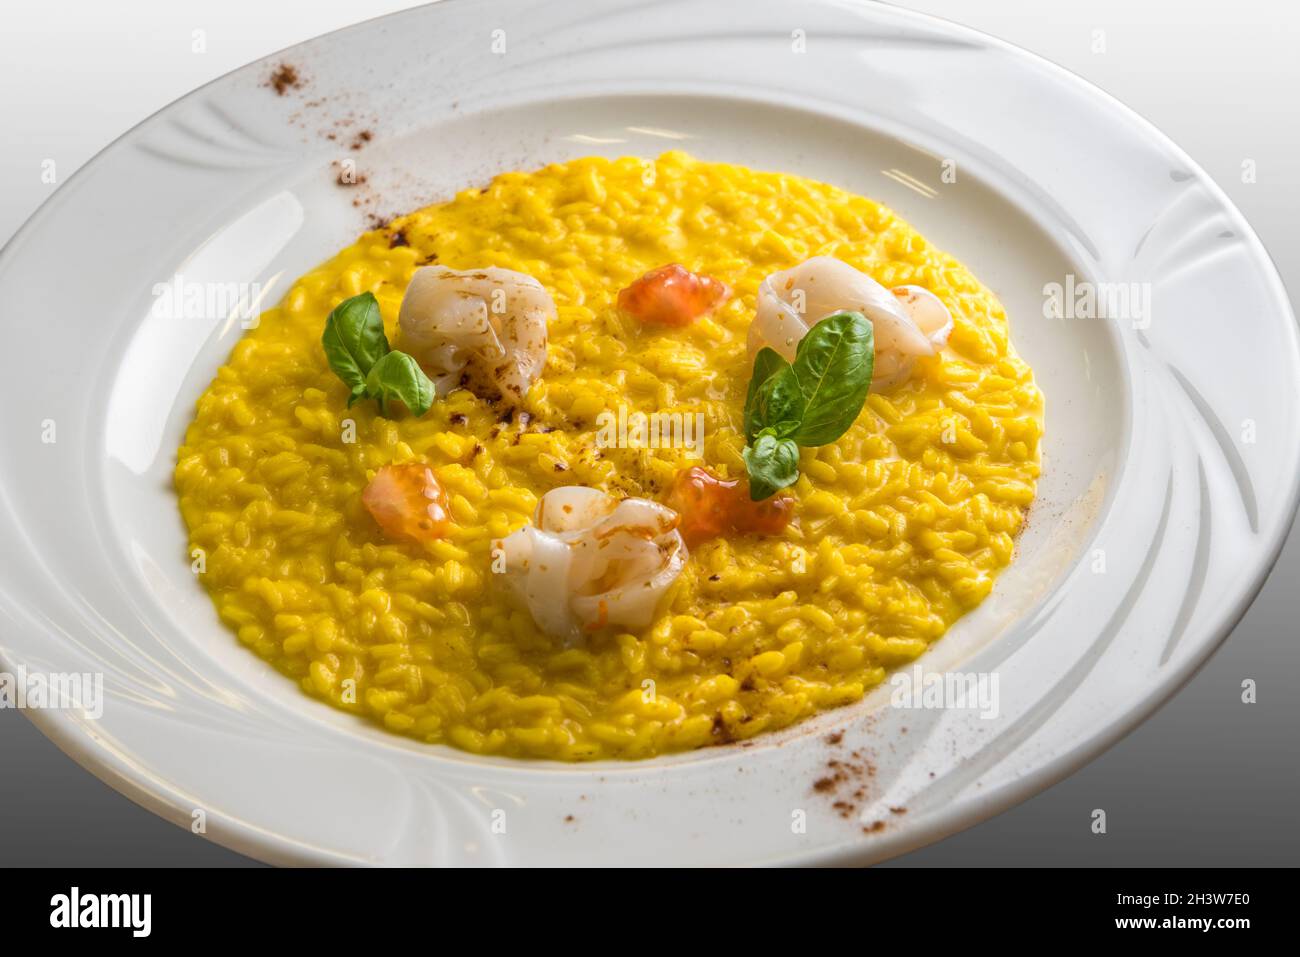 Yellow saffron risotto with cuttlefish, basil leaves and fresh tomato pulp, gourmet recipe in a white dish Stock Photo